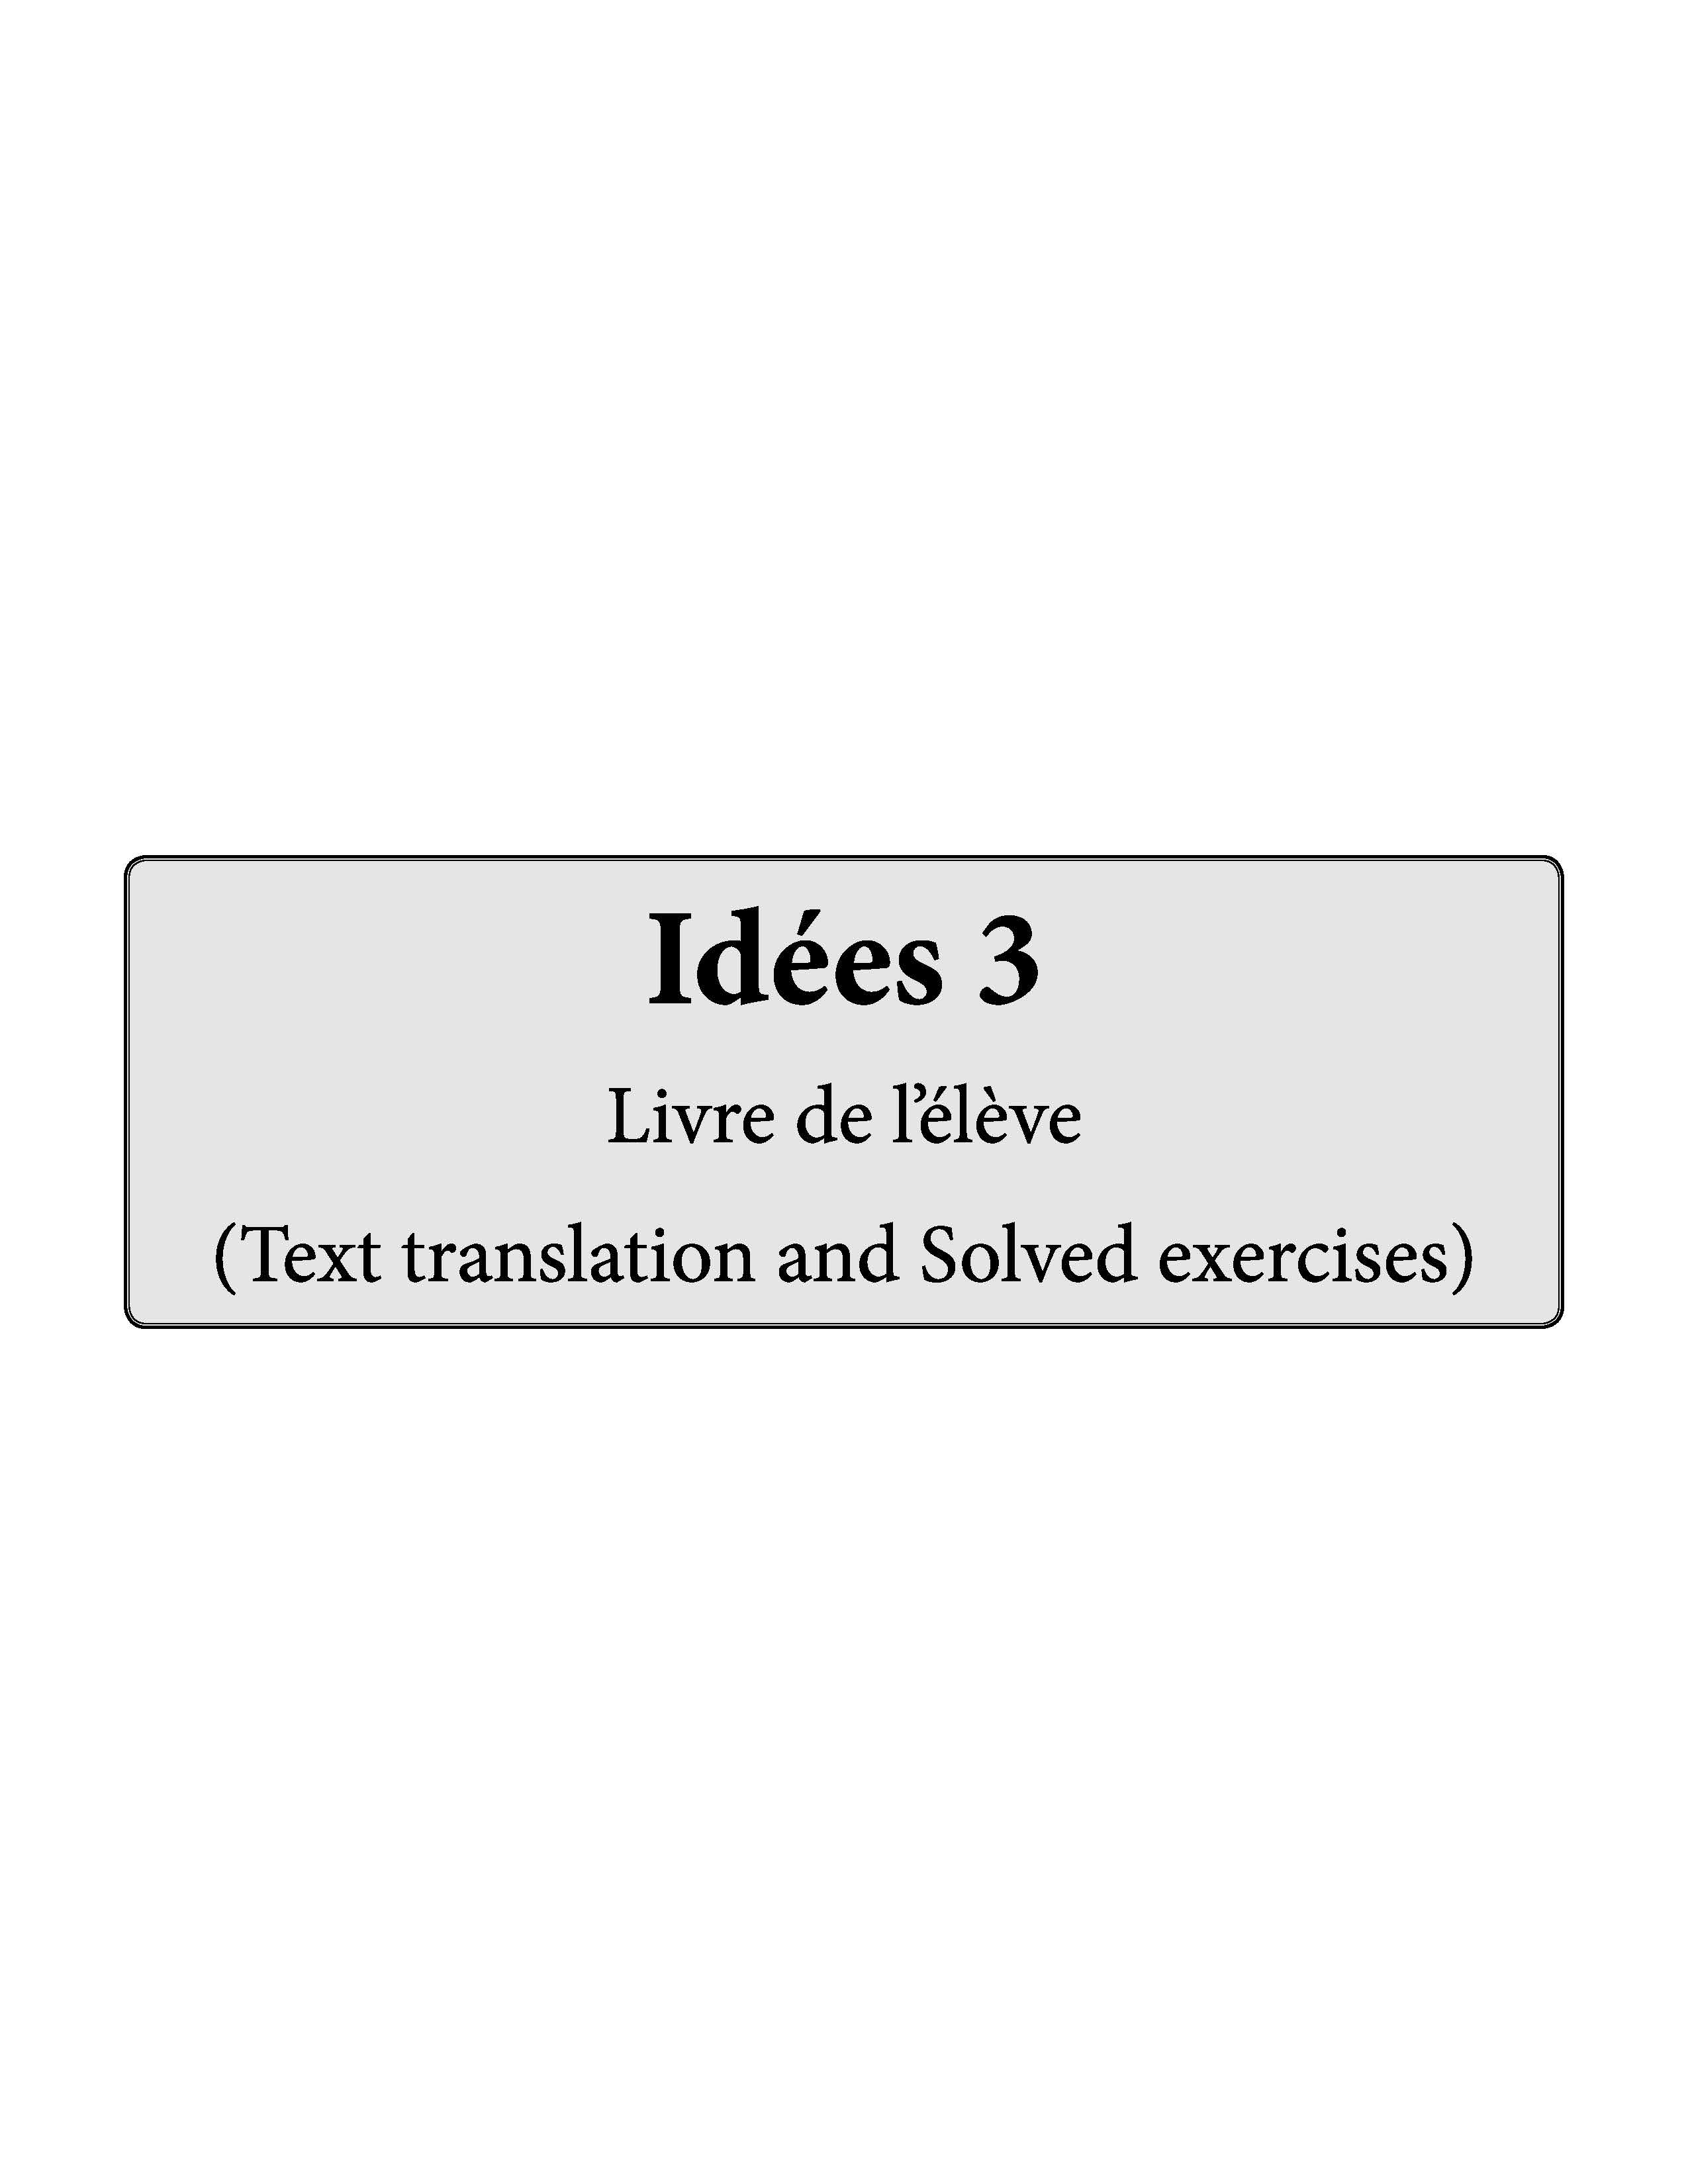 Idées Complete Study Material 3 (For Class 8) Text Translation